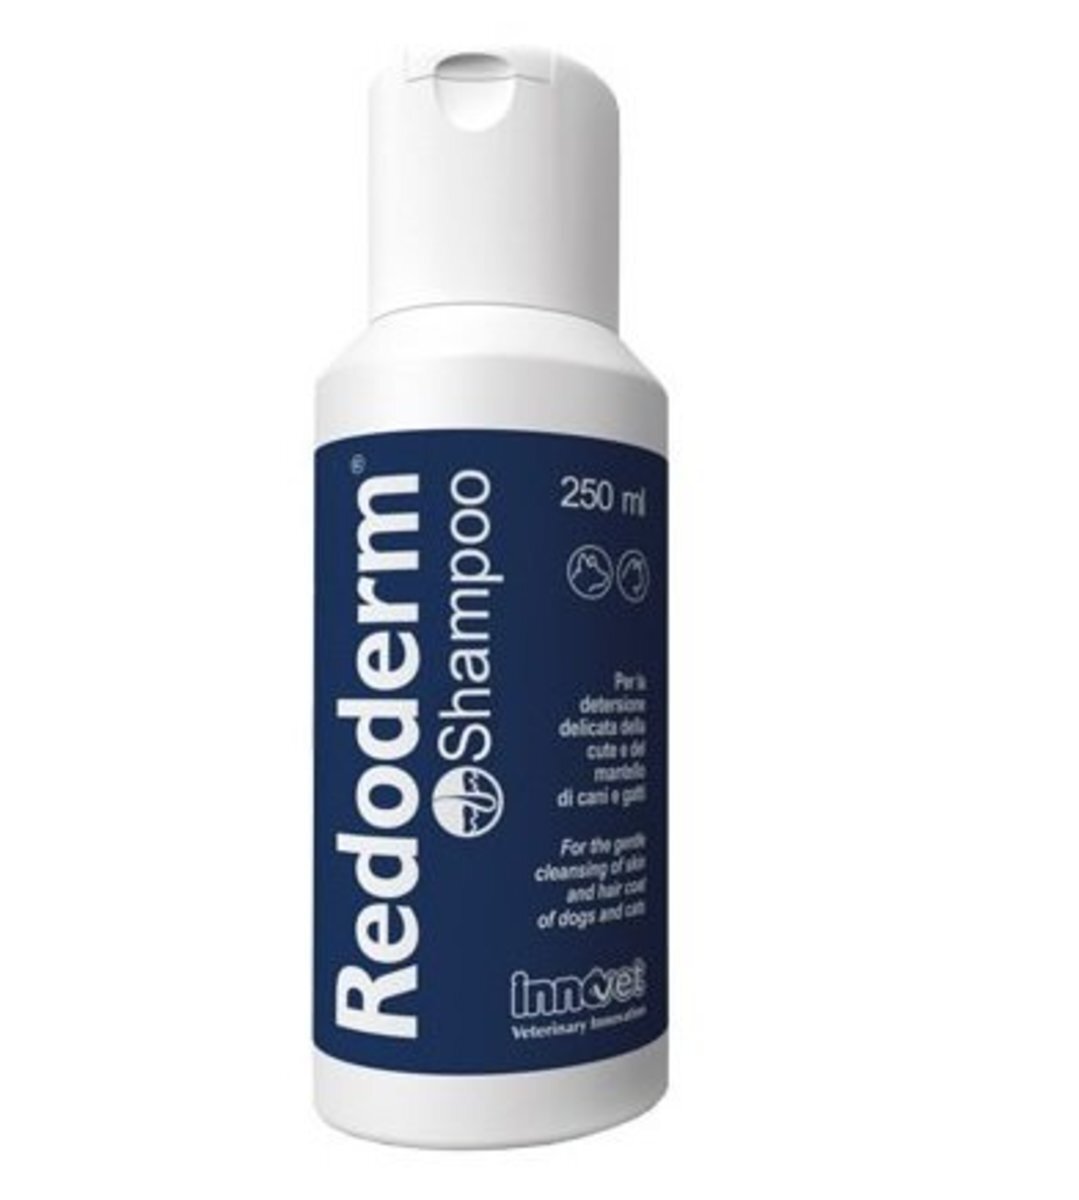 Redoderm Shampoo for Dogs & Cats 250ml